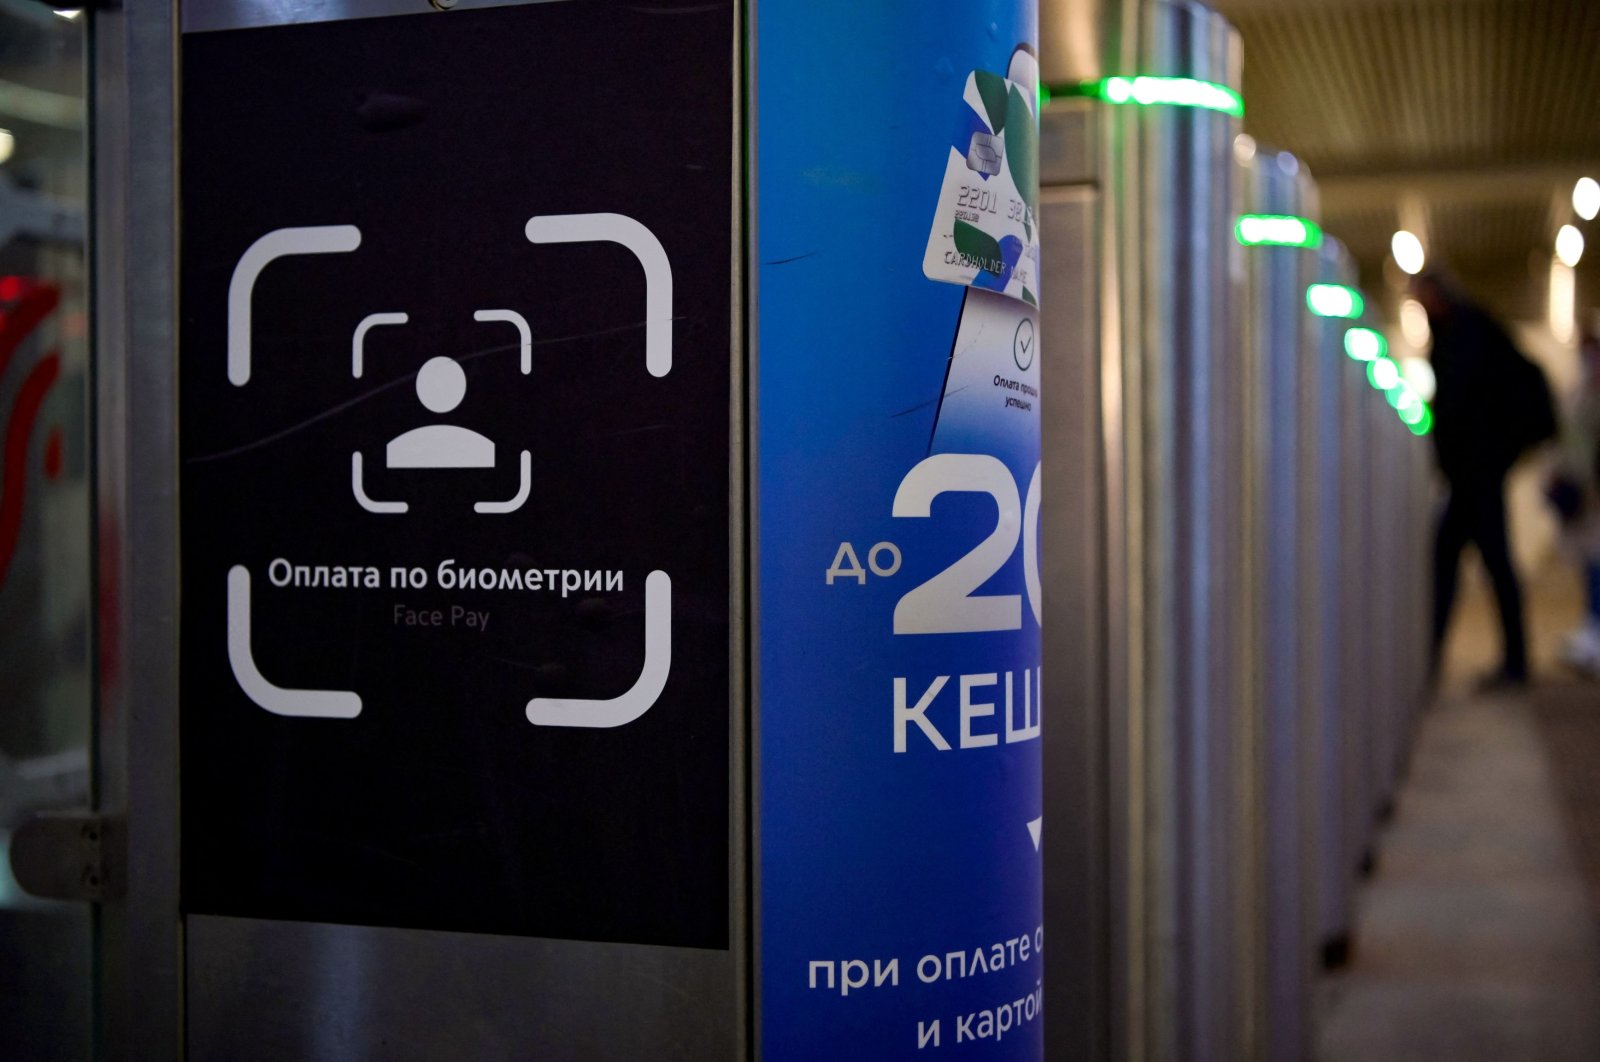 A sign sits on a ticket gate equipped with a facial recognition fare payment system, Face Pay, at Turgenevskaya metro station in Moscow, as the Russian capital tests the new system, Sept. 23, 2021. (AFP Photo)